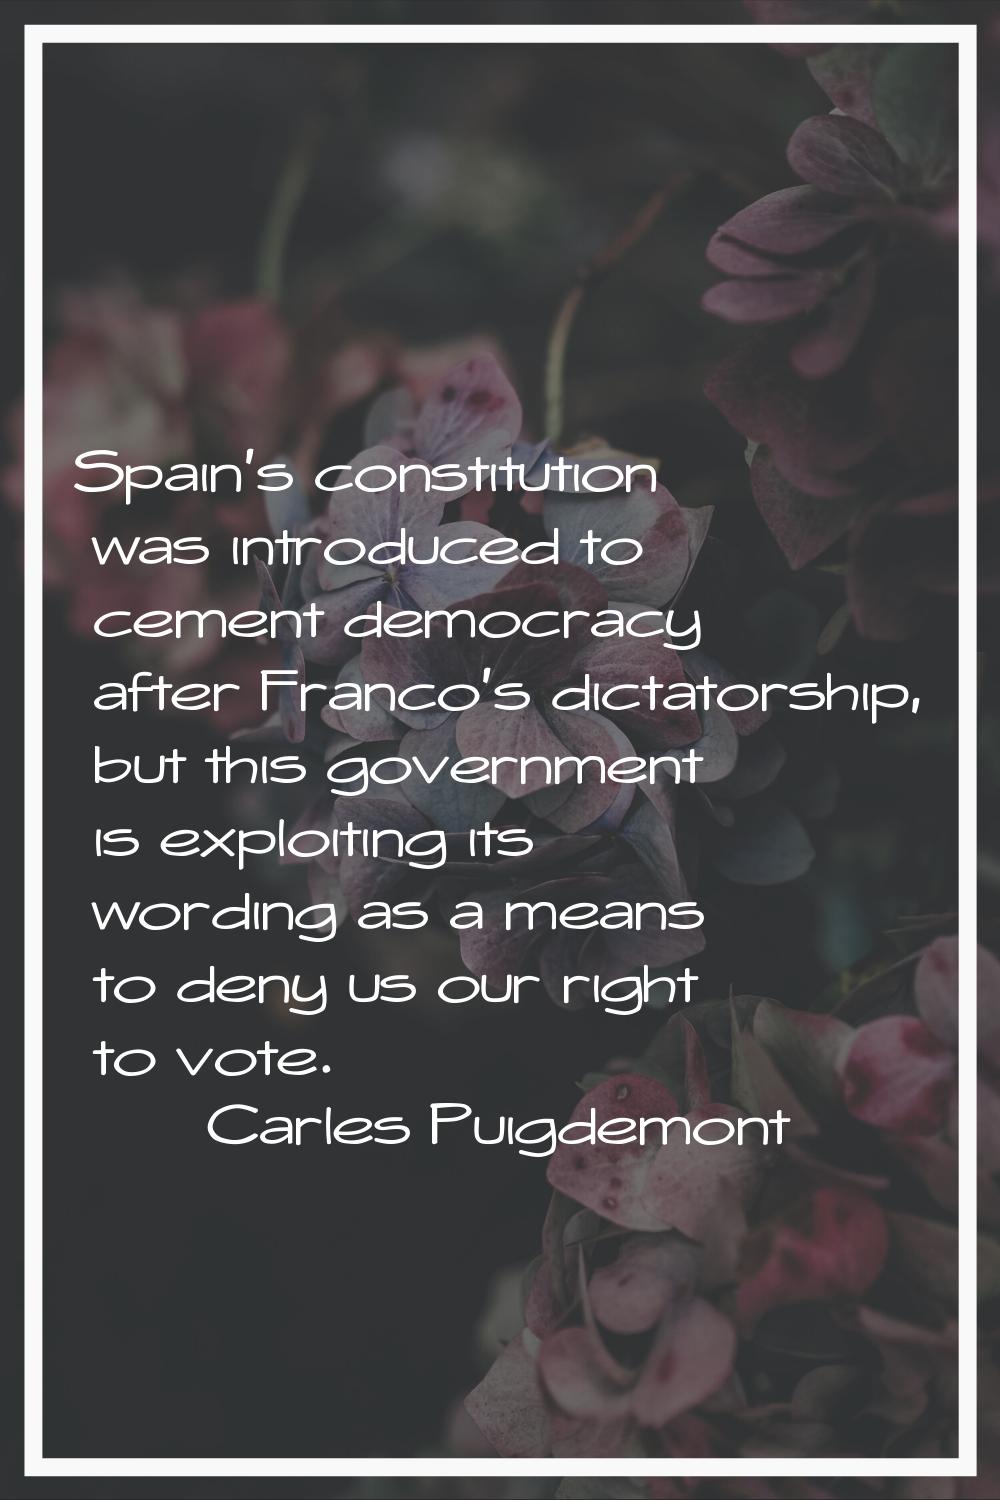 Spain's constitution was introduced to cement democracy after Franco's dictatorship, but this gover